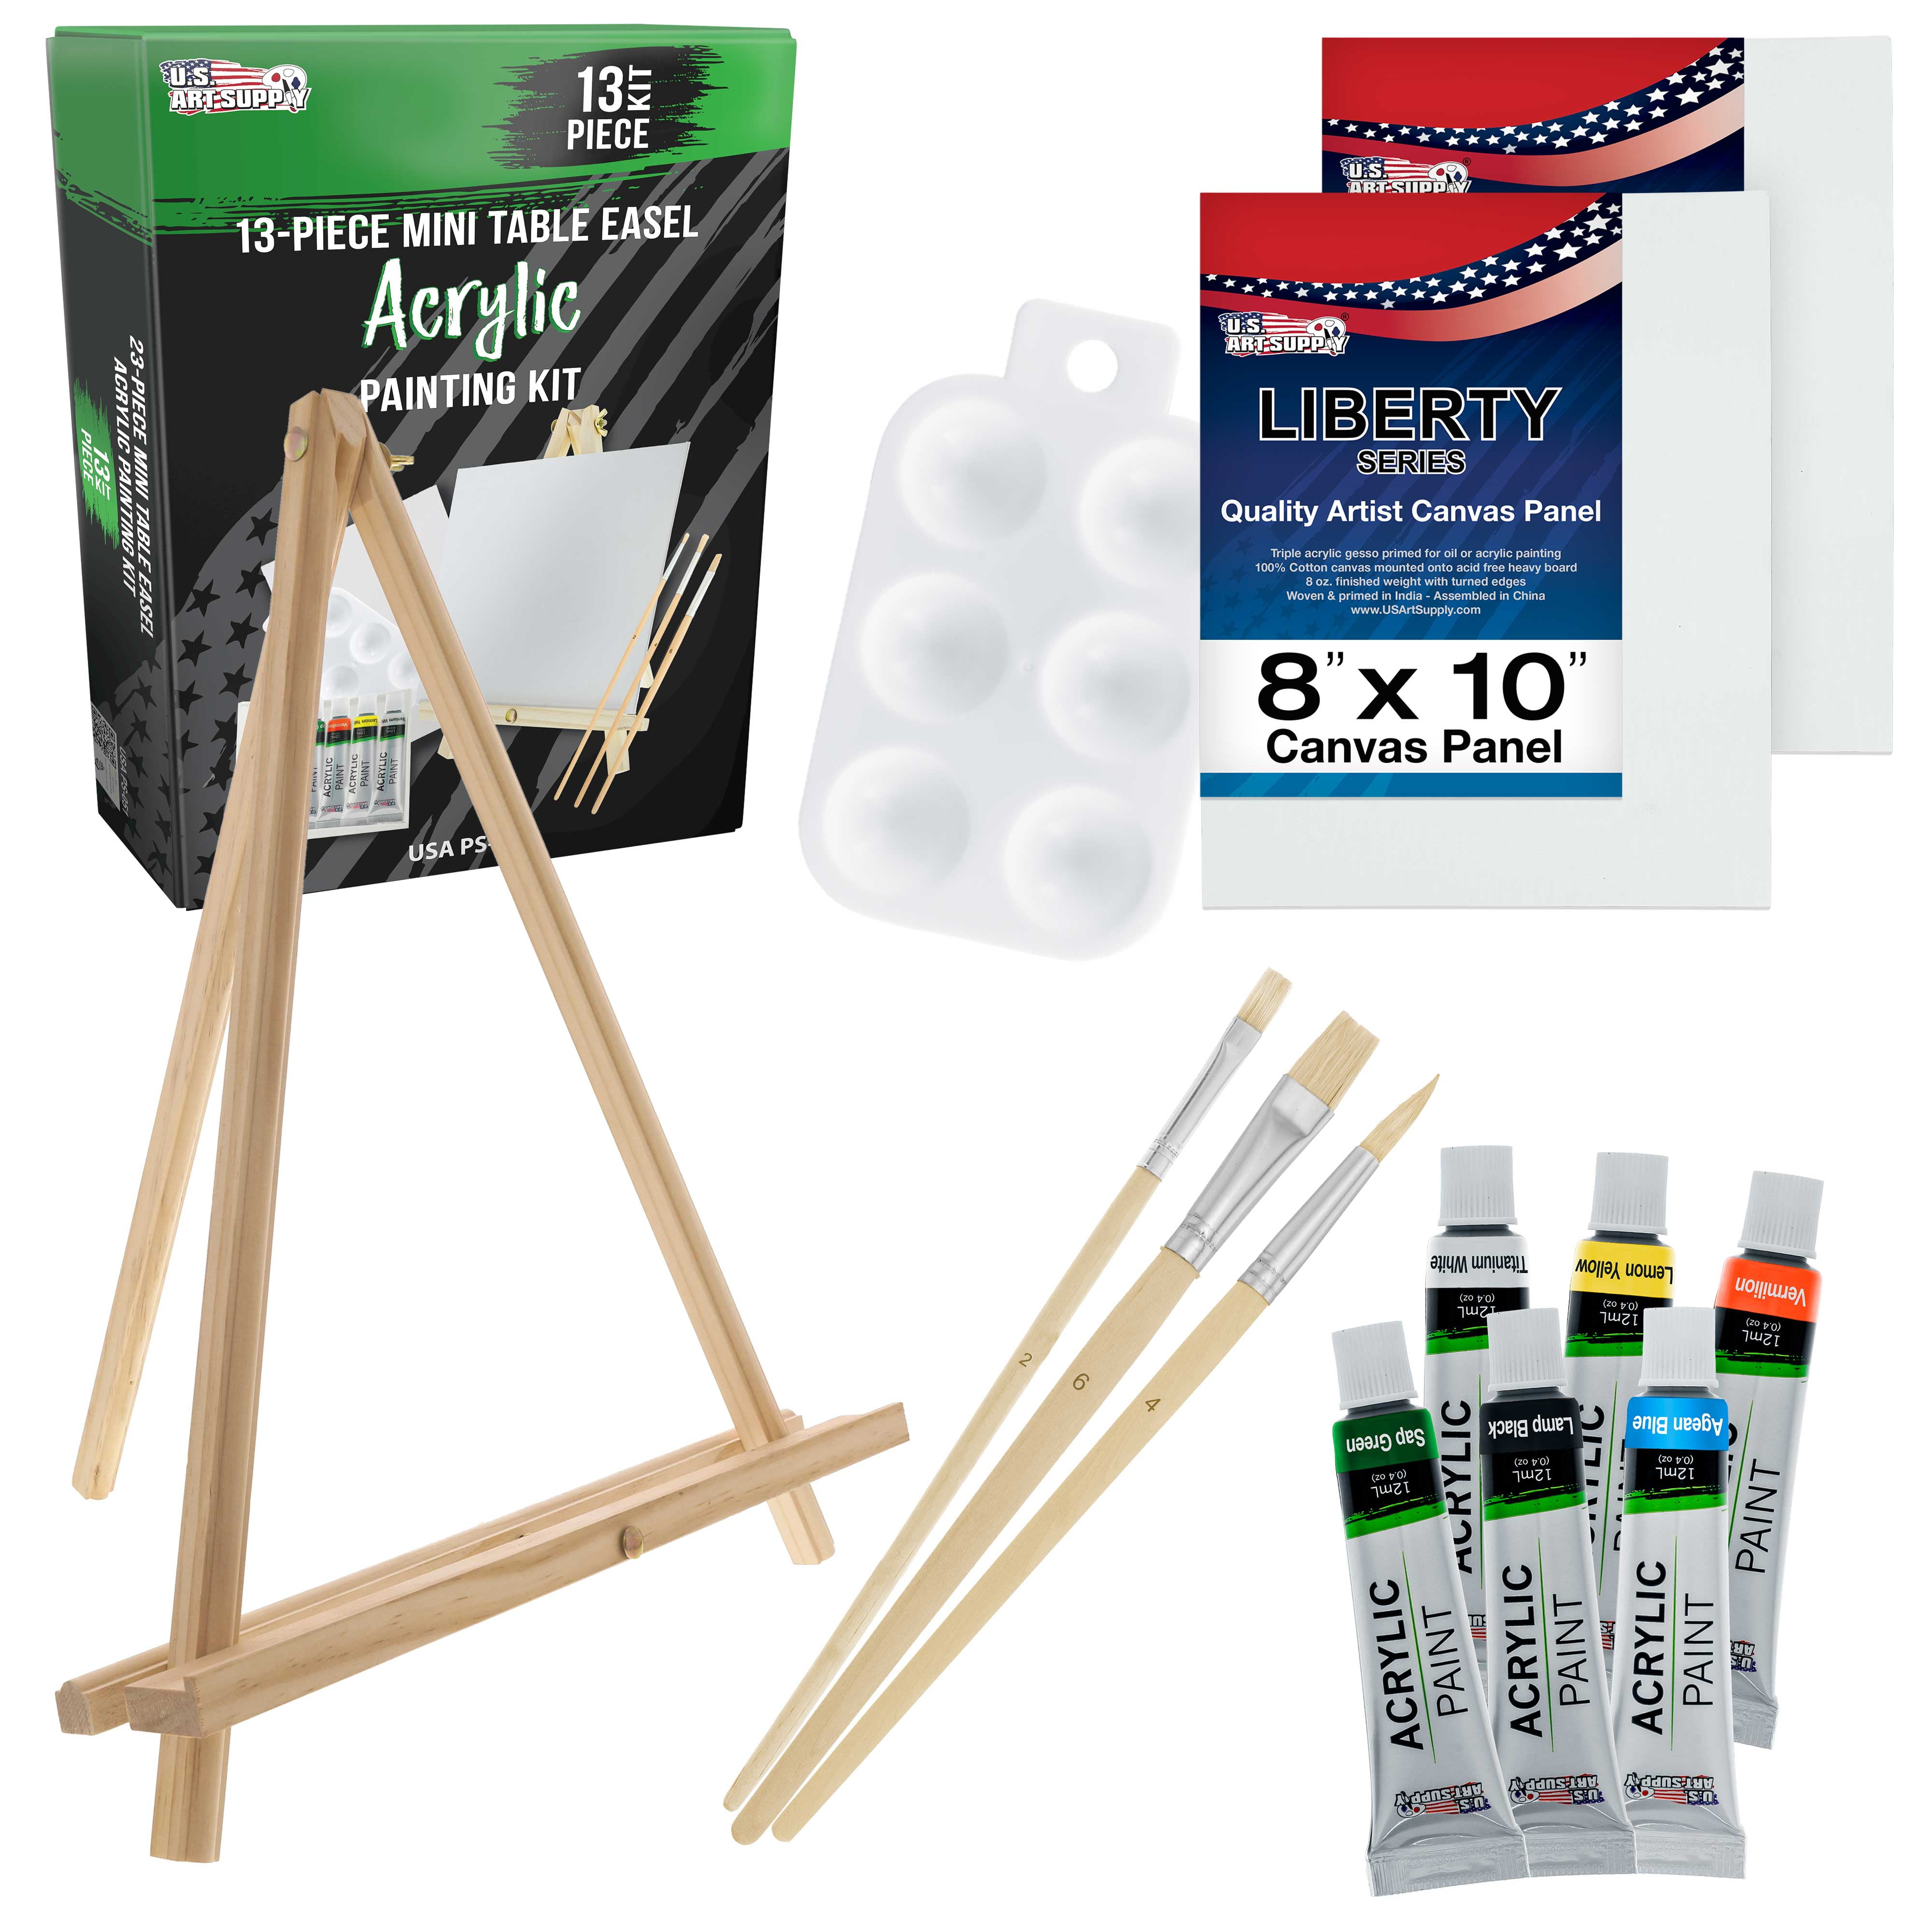 Paint Knives Art Sponges for Hobbyists and Beginners 48 Acrylic Paint 77 PCS Painting Supplies with Paint Brushes Easel Acrylic Paint Set Palette Painting Set for Kids Adults Canvases 